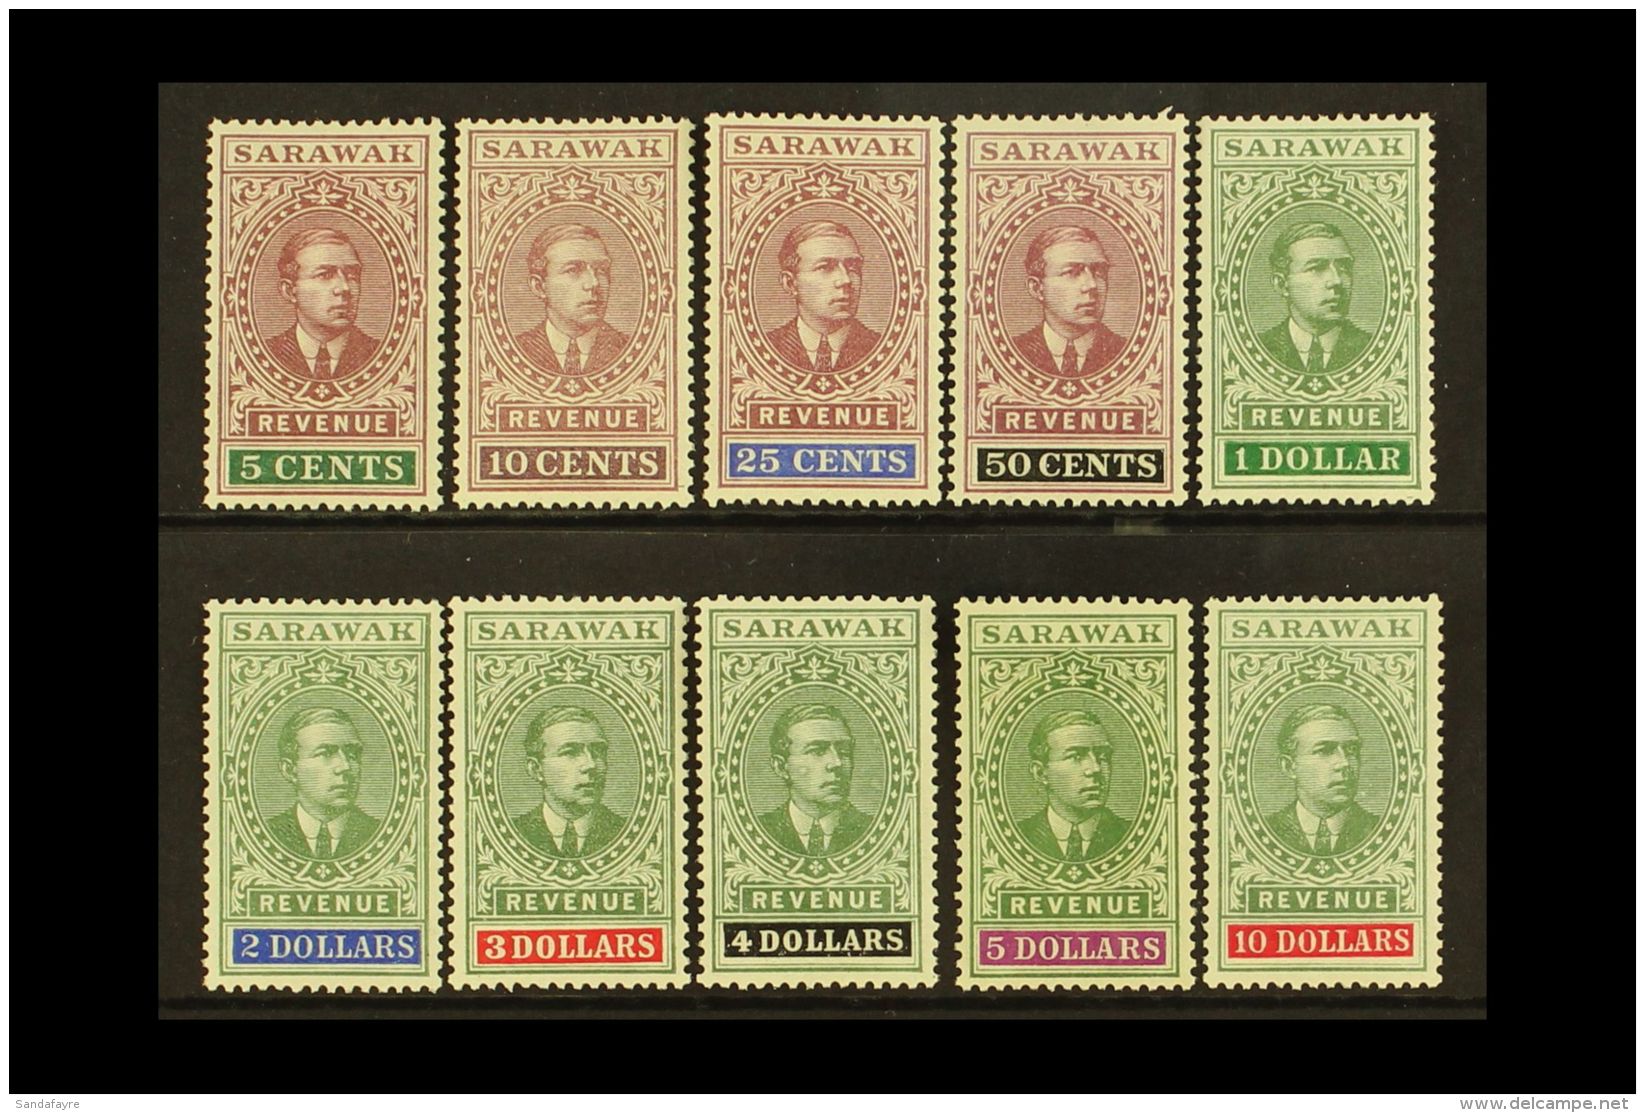 REVENUES 1918 Tall Issue Complete From 5c To $10 (no 3c) Barefoot 31/40, Never Hinged Mint (10 Stamps) For More... - Sarawak (...-1963)